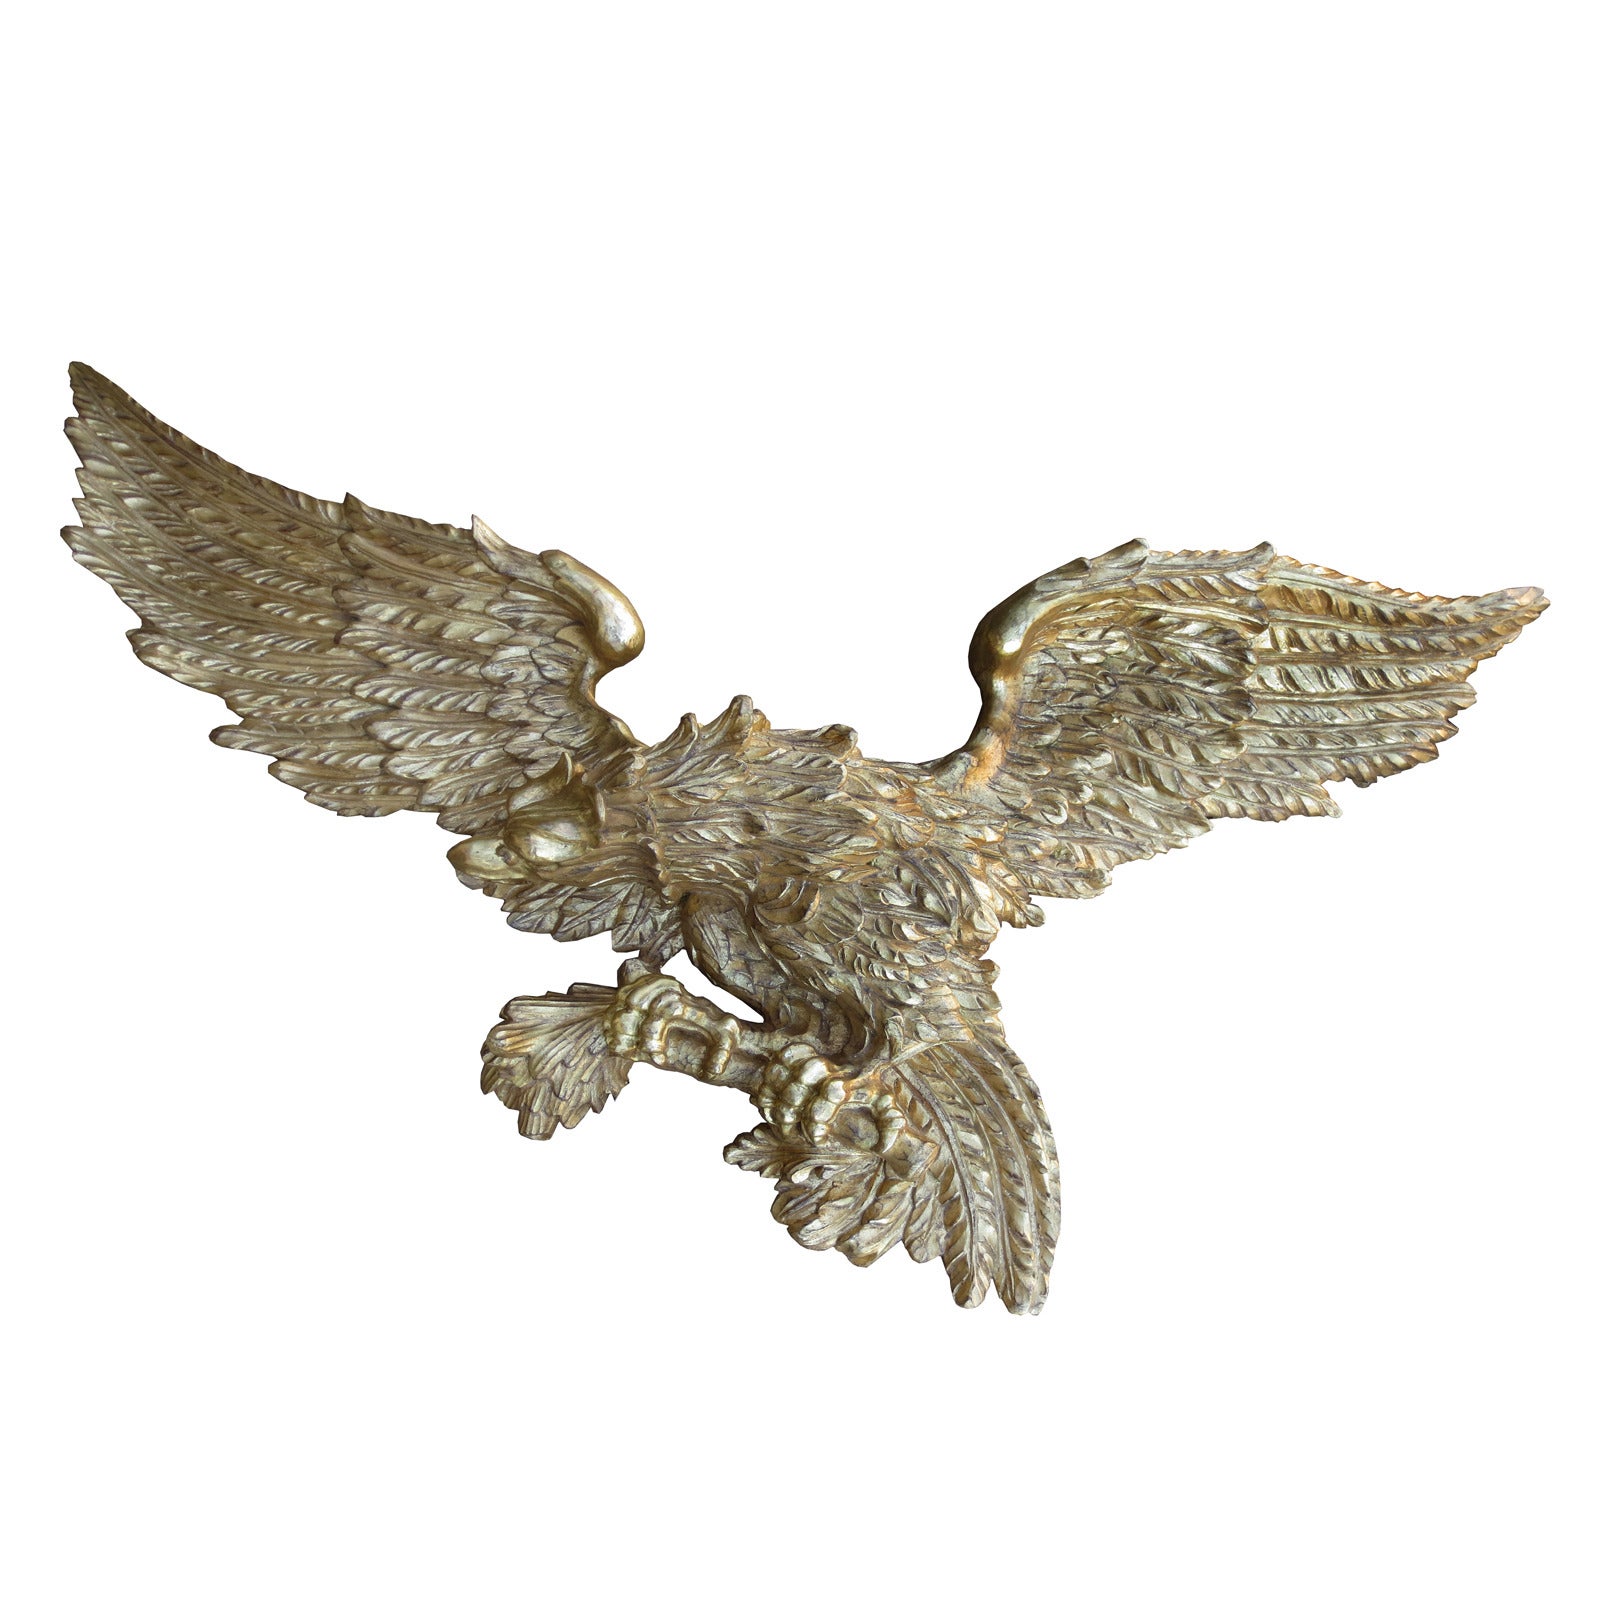 19th Century Beautifully Carved American Eagle